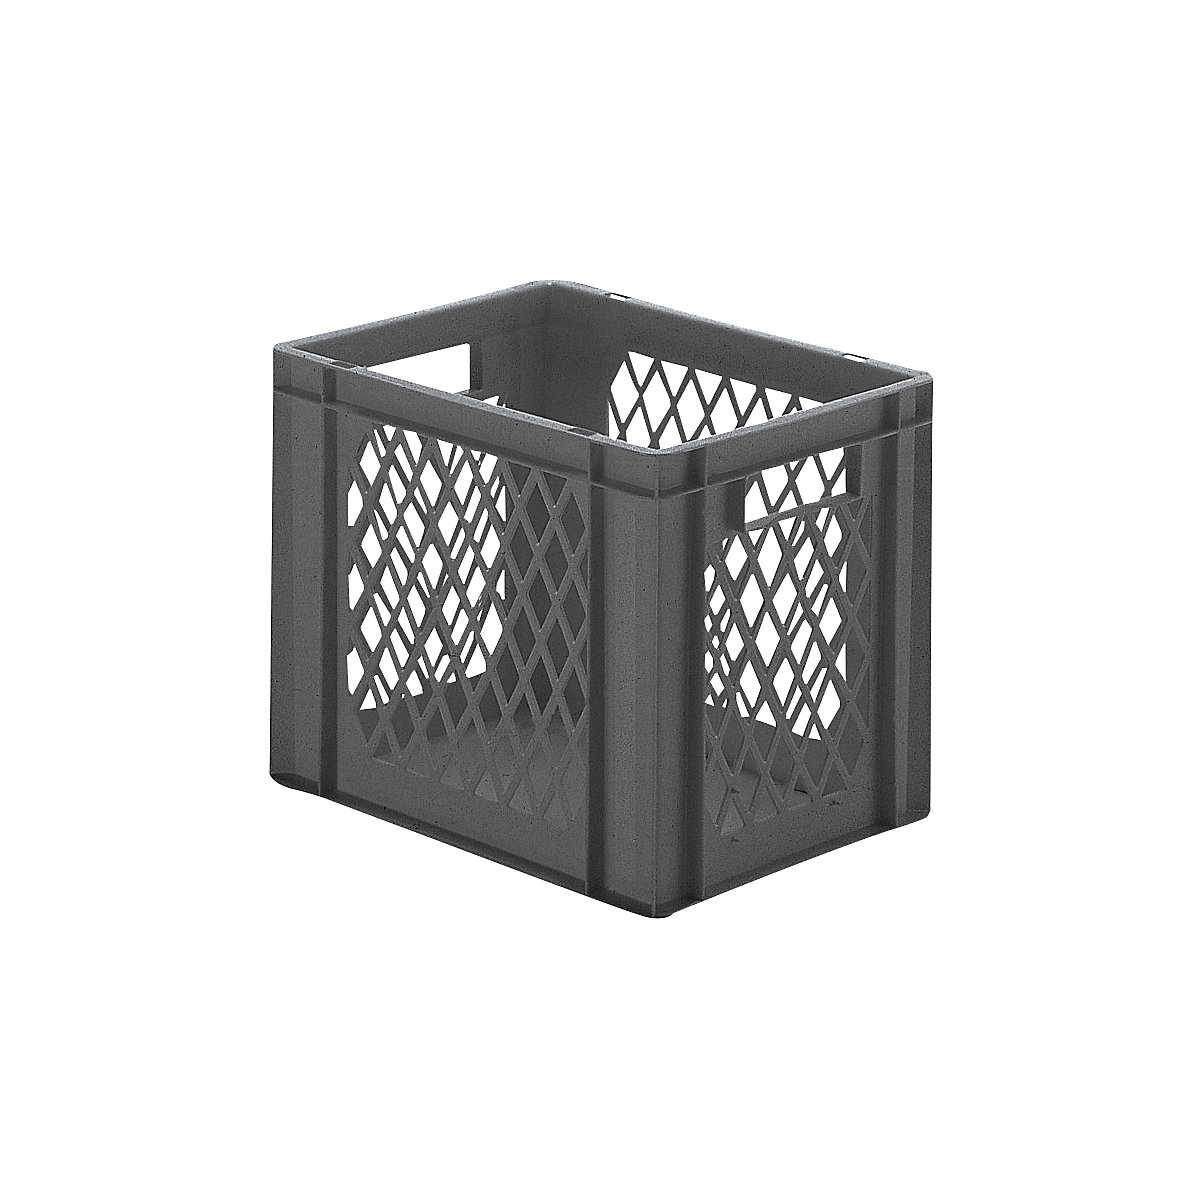 Euro stacking container, perforated walls, closed base, LxWxH 400 x 300 x 320 mm, grey, pack of 5